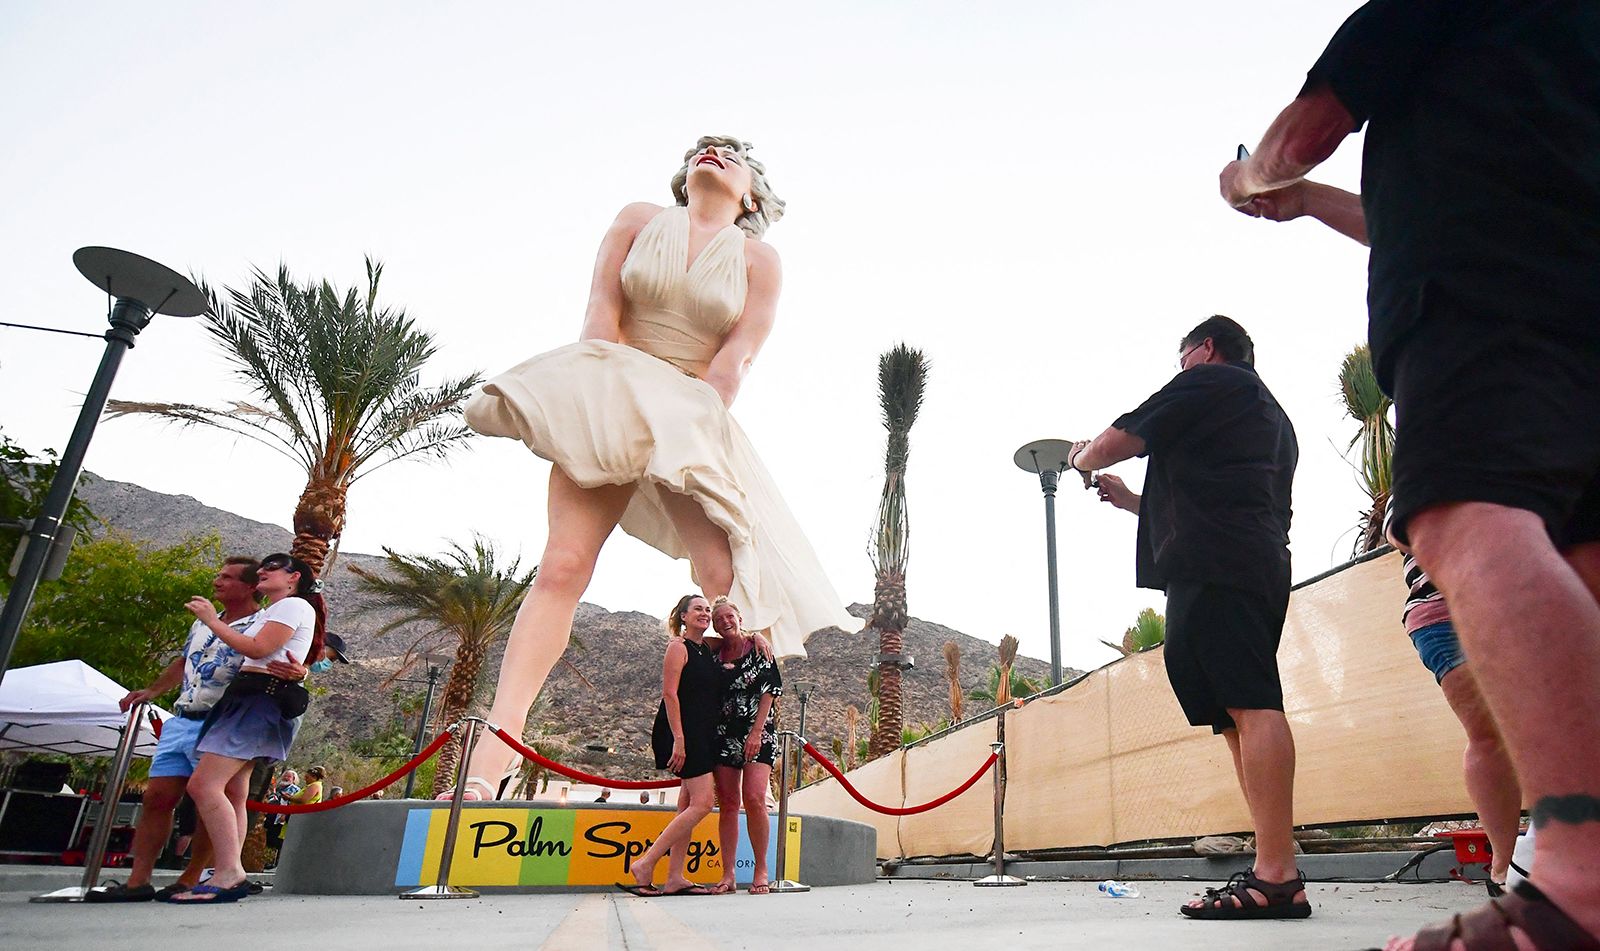 Sexist' Marilyn Monroe statue installed in Palm Springs amid widespread  opposition